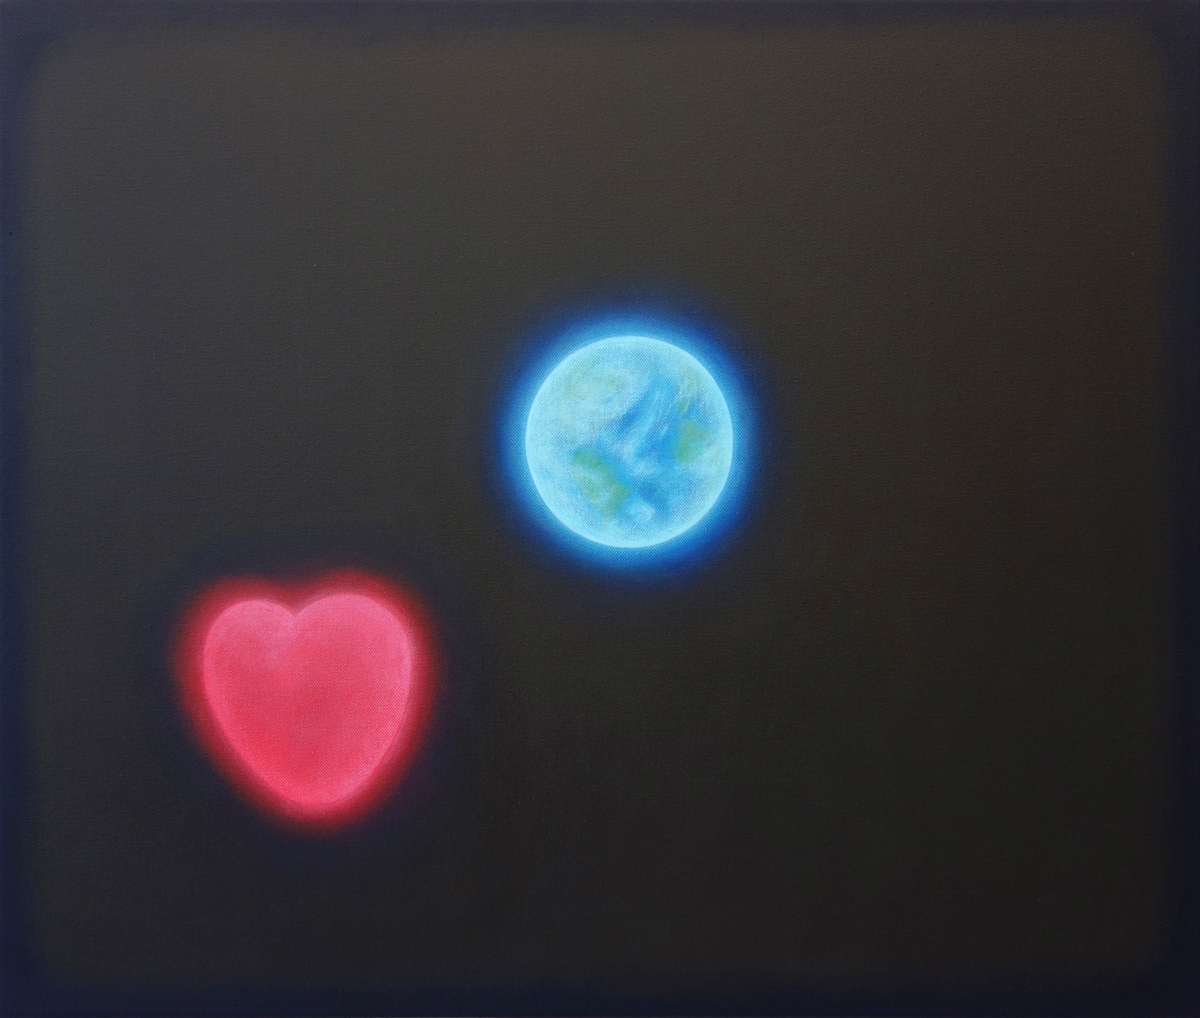 Red heart and blue planet earth against a black background